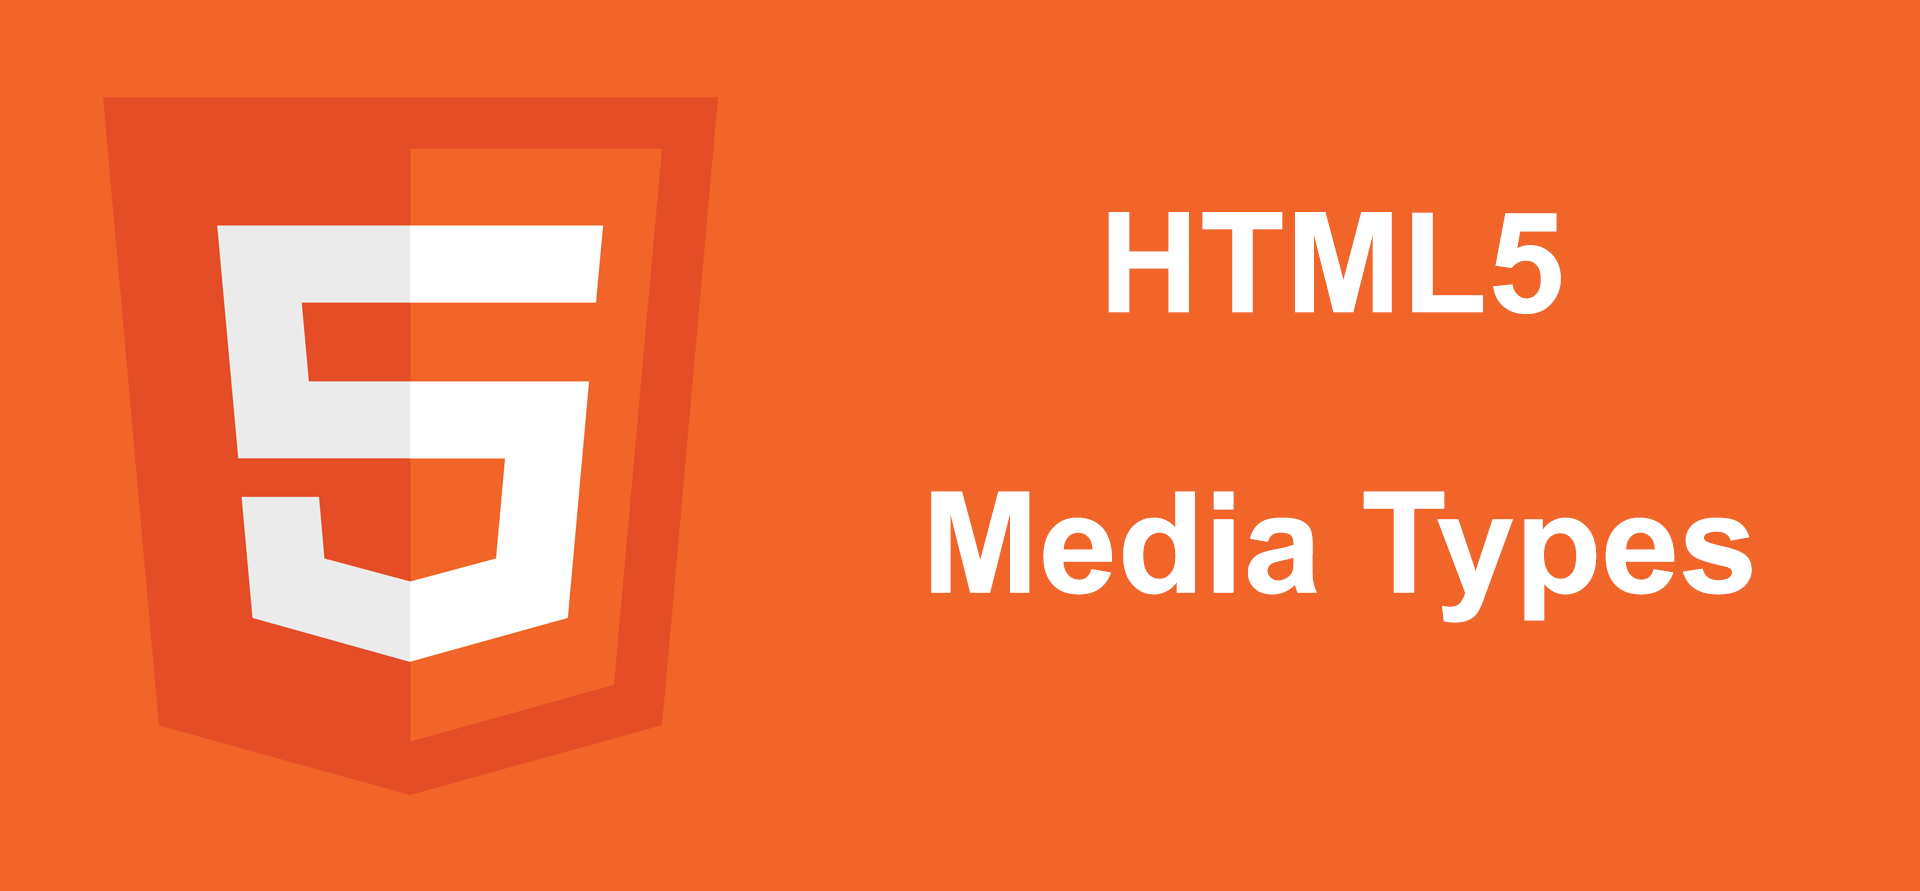 Tutorial HTML5 - MIME Types image